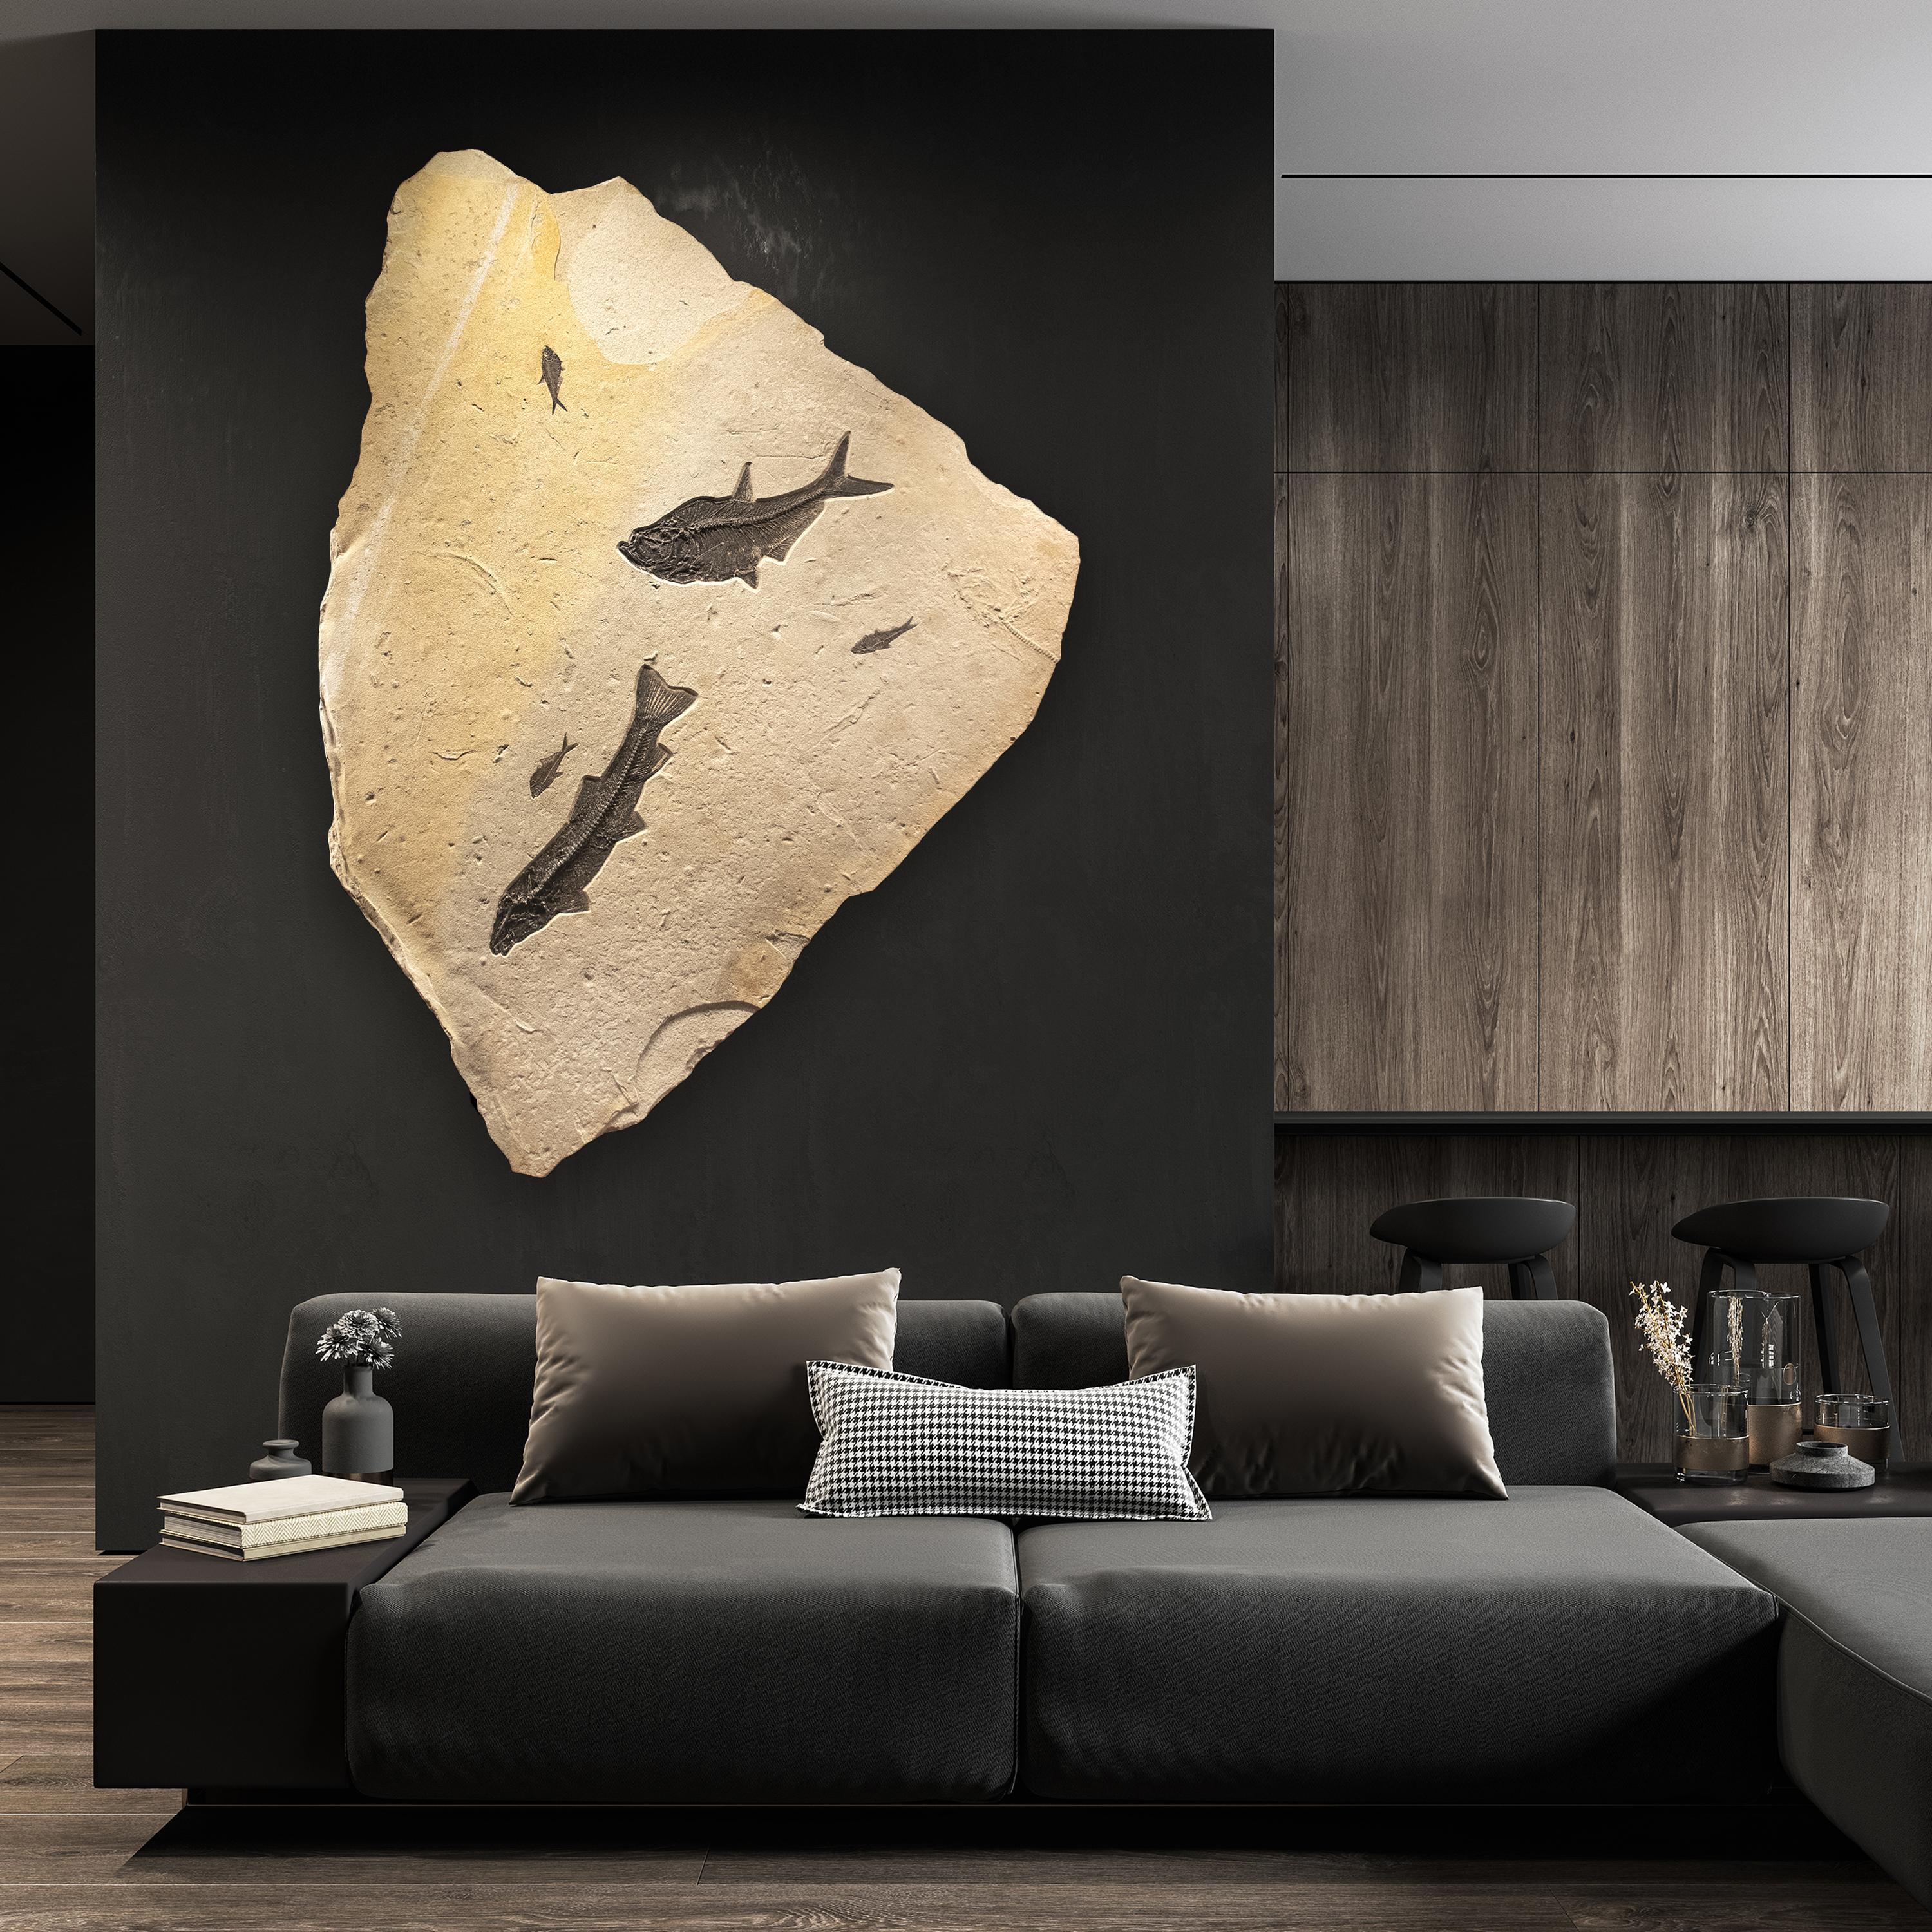 This fossil mural features some of the most famous fossil fish from the Green River Formation: one Notogoneus osculus, three Diplomystus dentatus, and one Knightia eocaena. These are all Eocene era fossils dating back about 50 million years. These